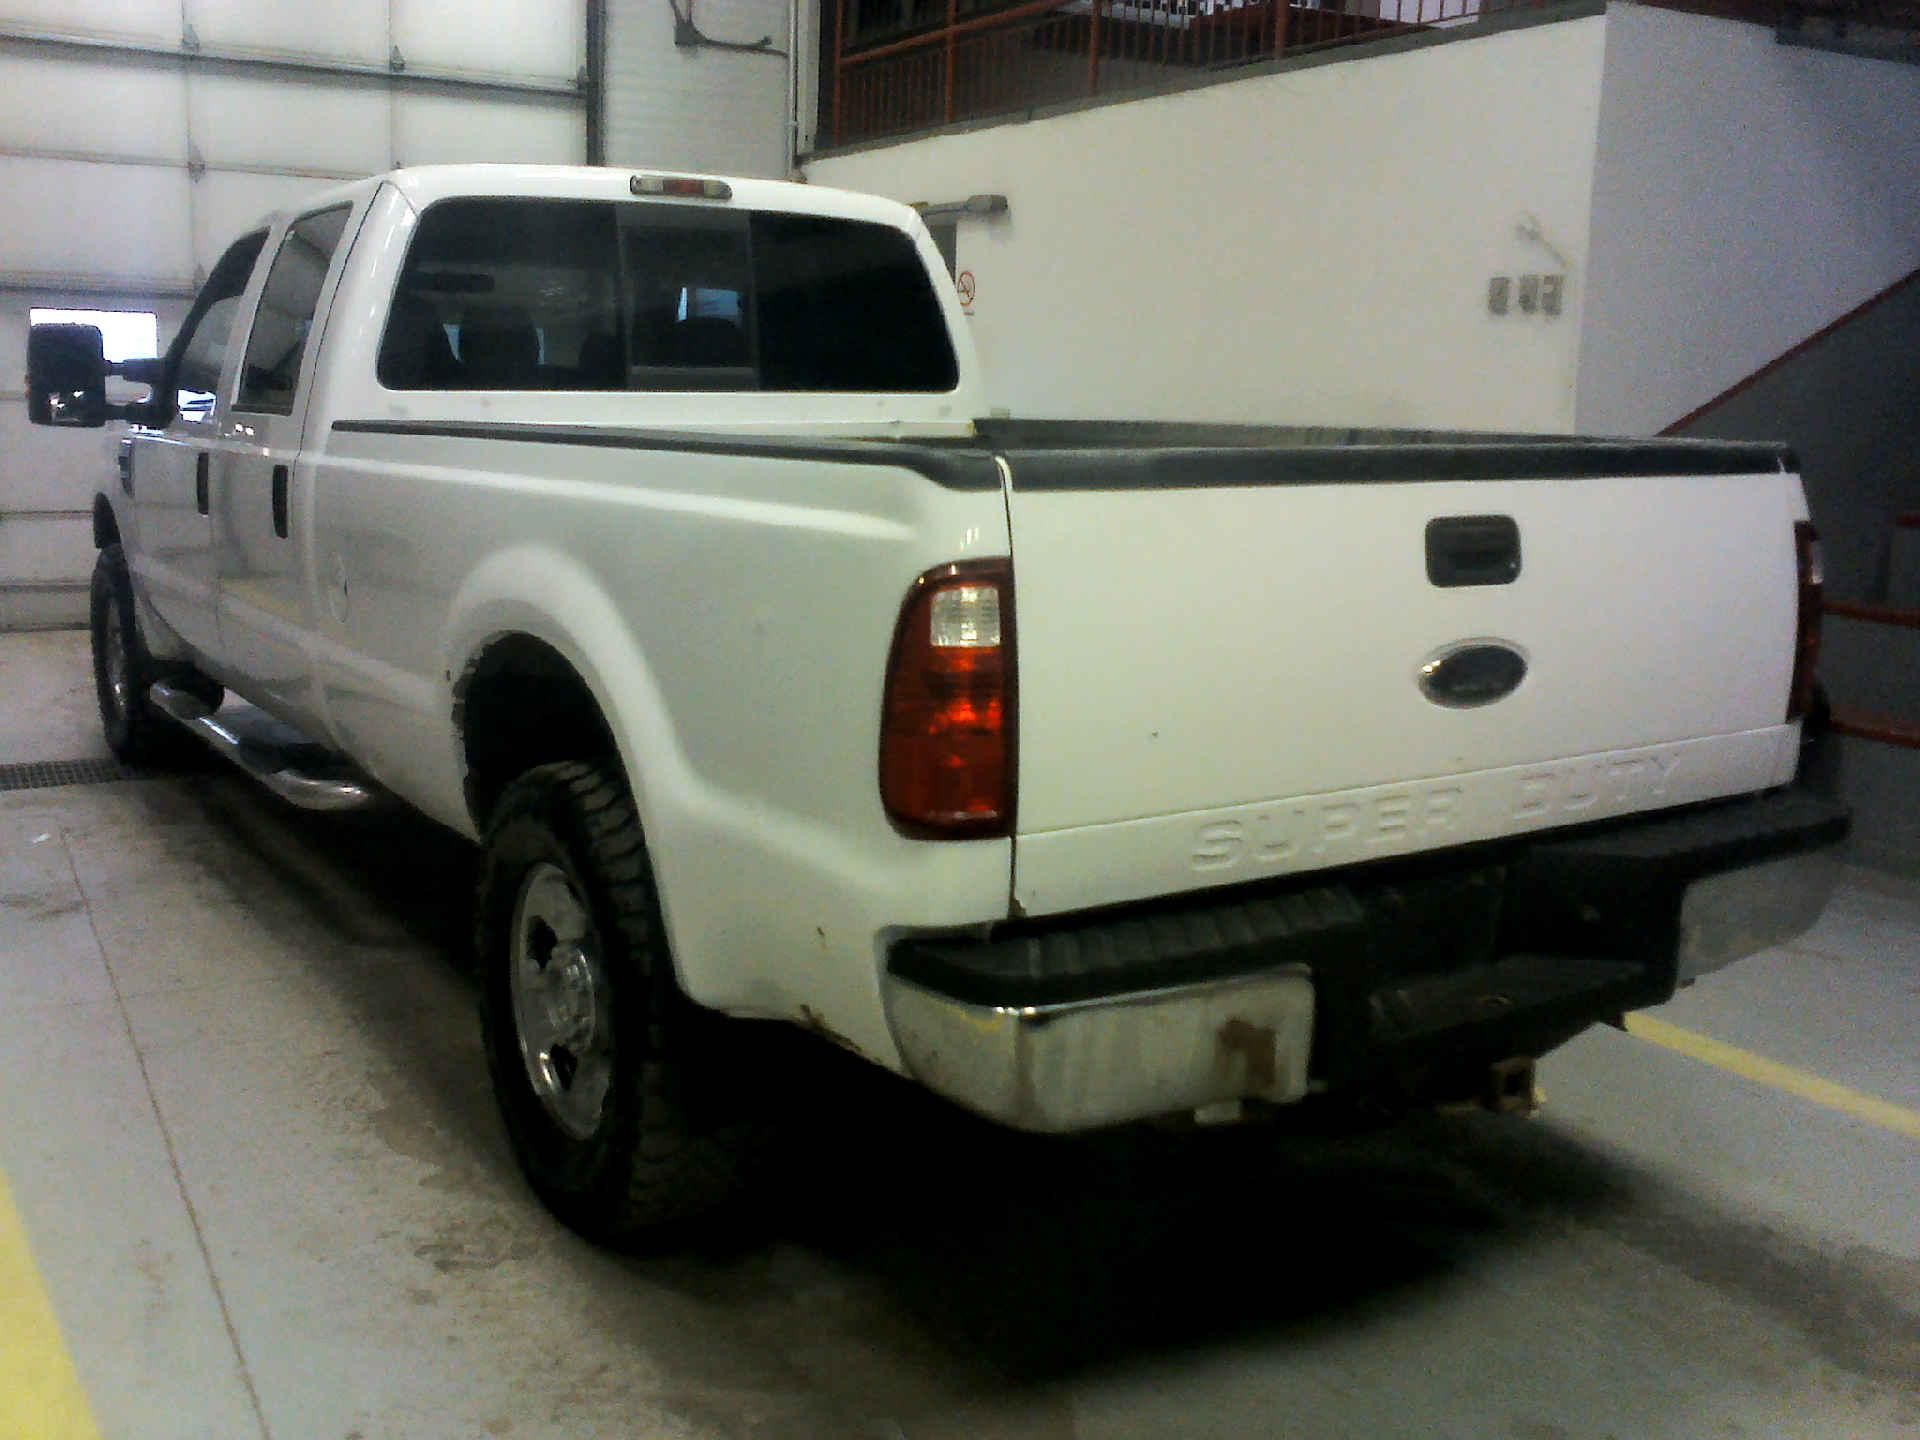 2008 FORD F-350 SD XLT CREW CAB 4WD 6.4L V8 OHV 32V TURBO DIESEL AUTOMATIC SN:1FTWW31RX8EA59465 - Image 2 of 9